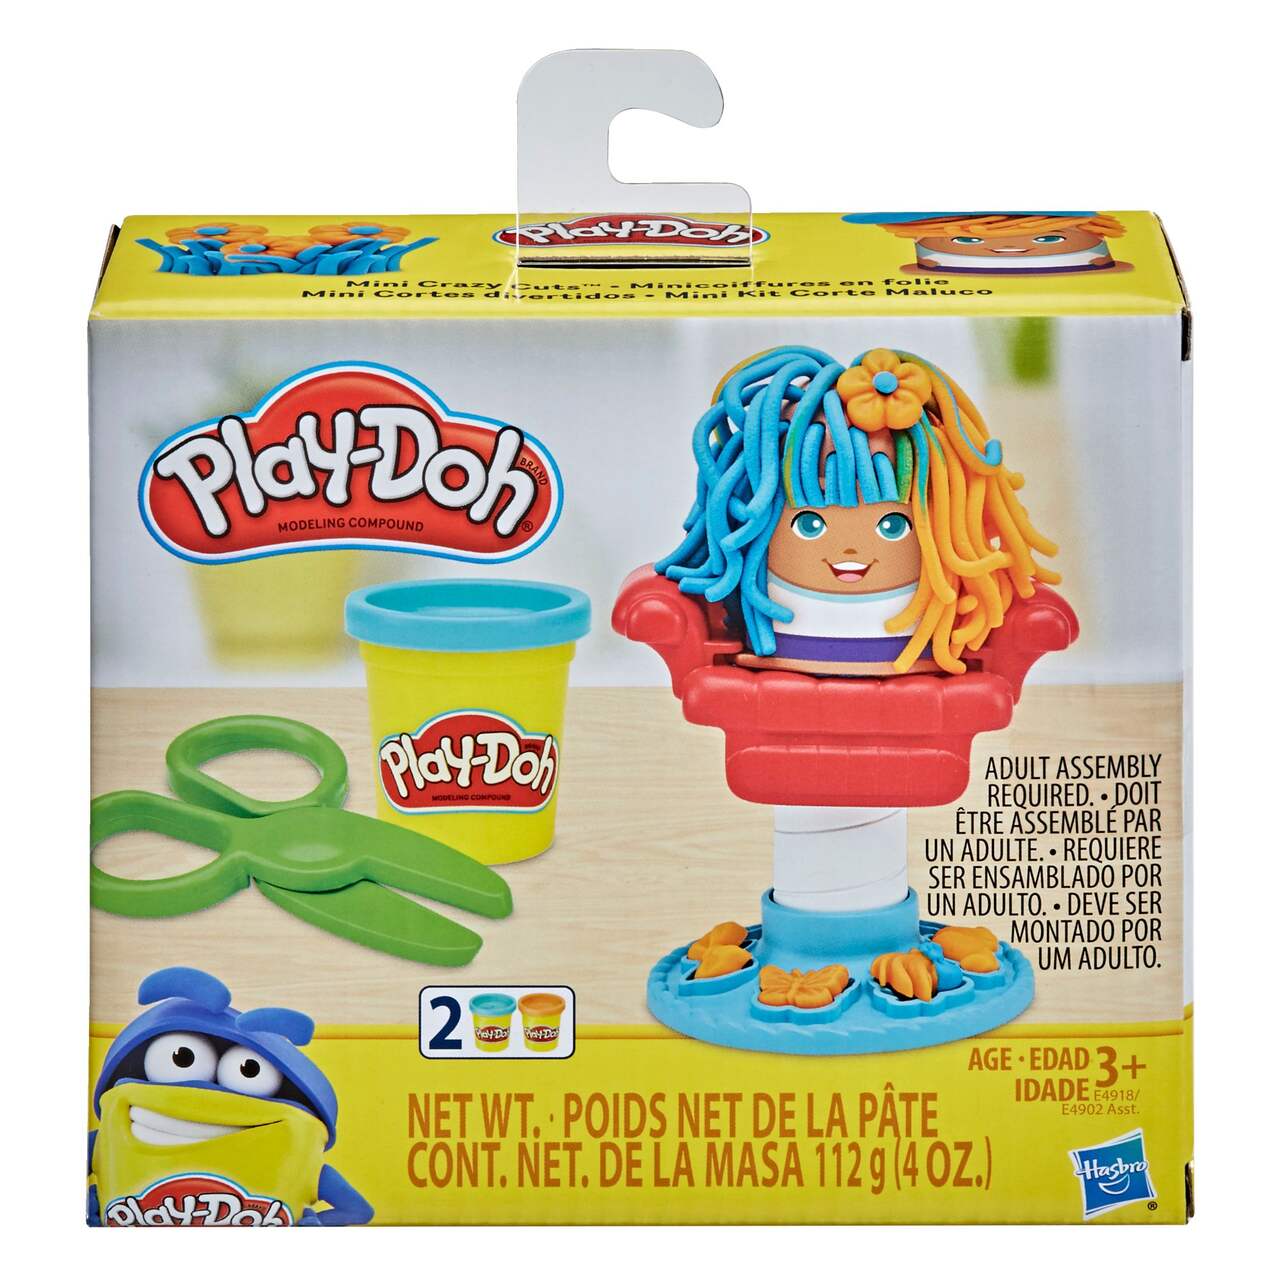  Play Doh Fun Tub Playset, Starter Set for Kids with